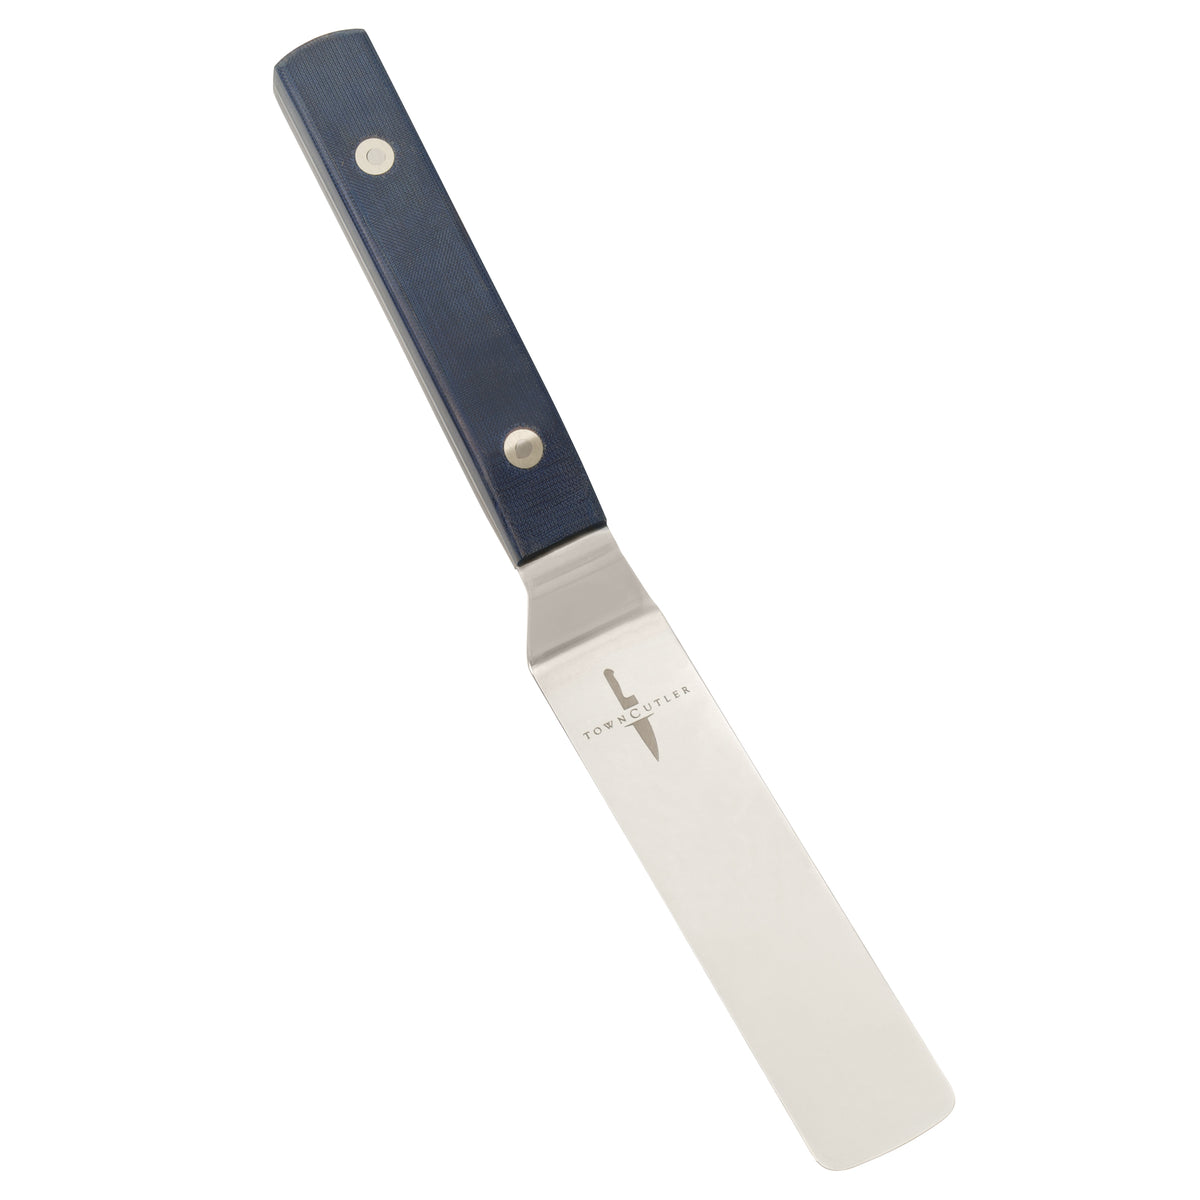 Blue Linen micarta offset palette knife for plating, shaping, spreading, cutting, and serving. Endless uses for this versatile kitchen tool